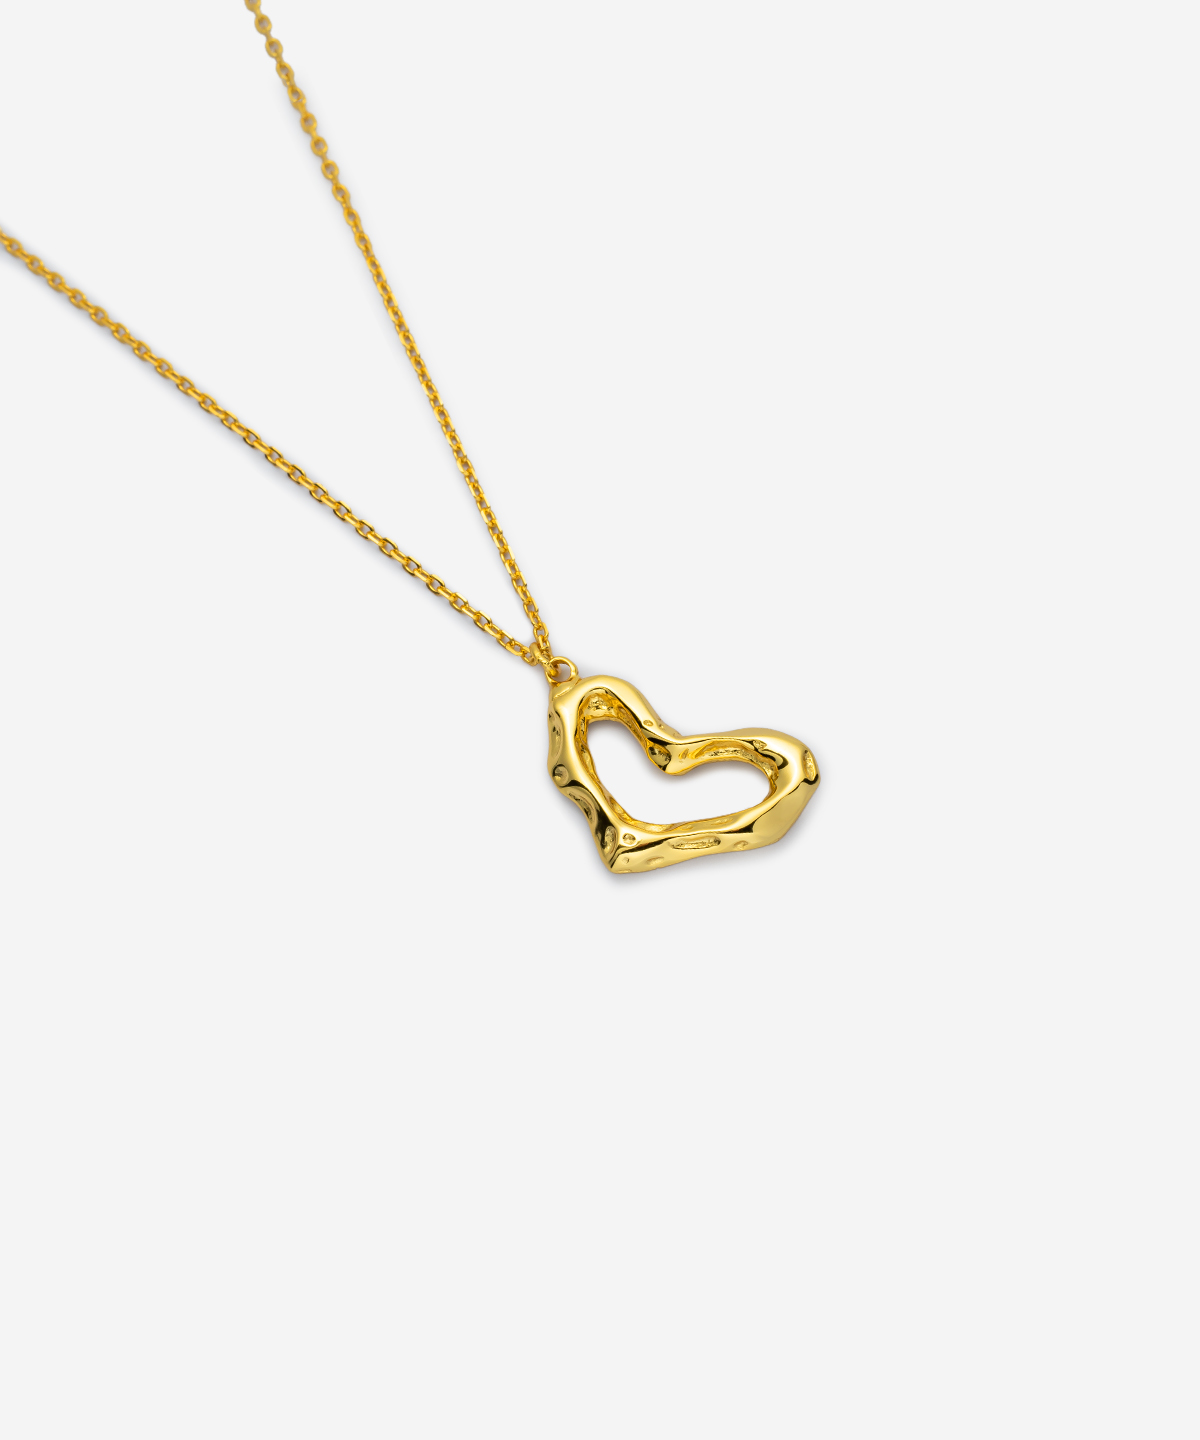 Antique heart gold-plated  necklace